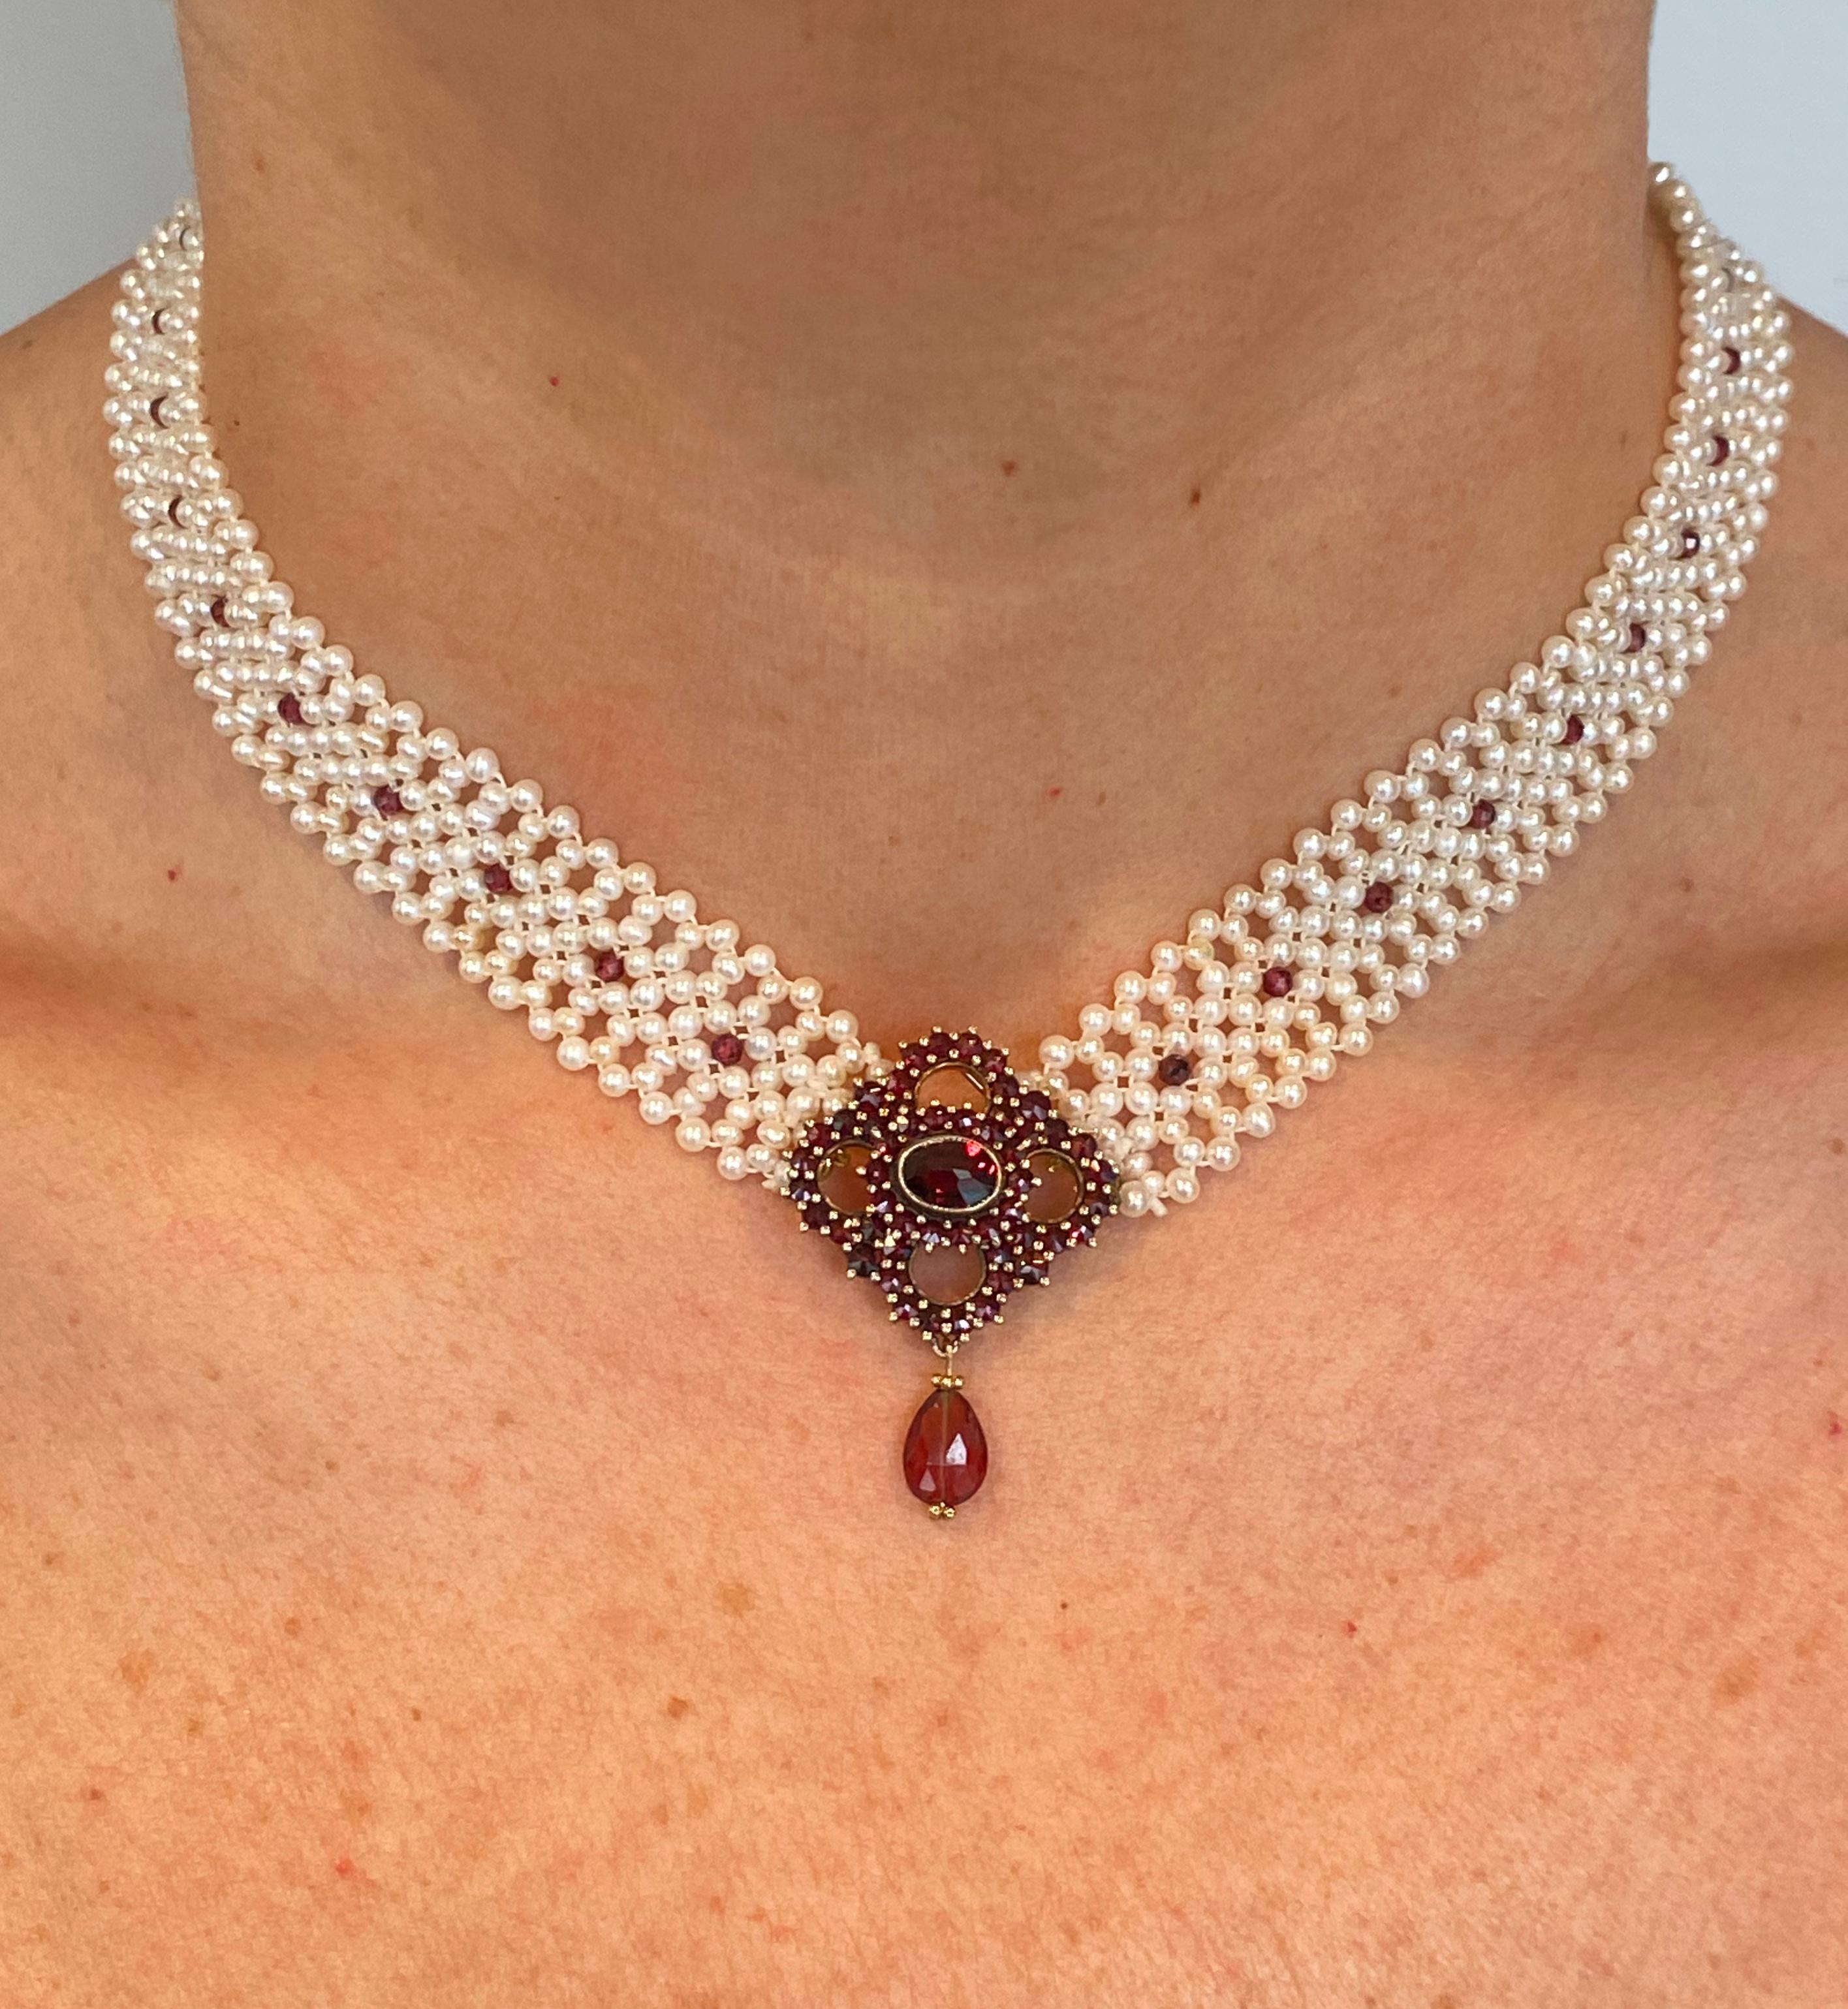 Women's Marina J. All Pearl Woven Necklace with Vintage Garnet Centerpiece For Sale